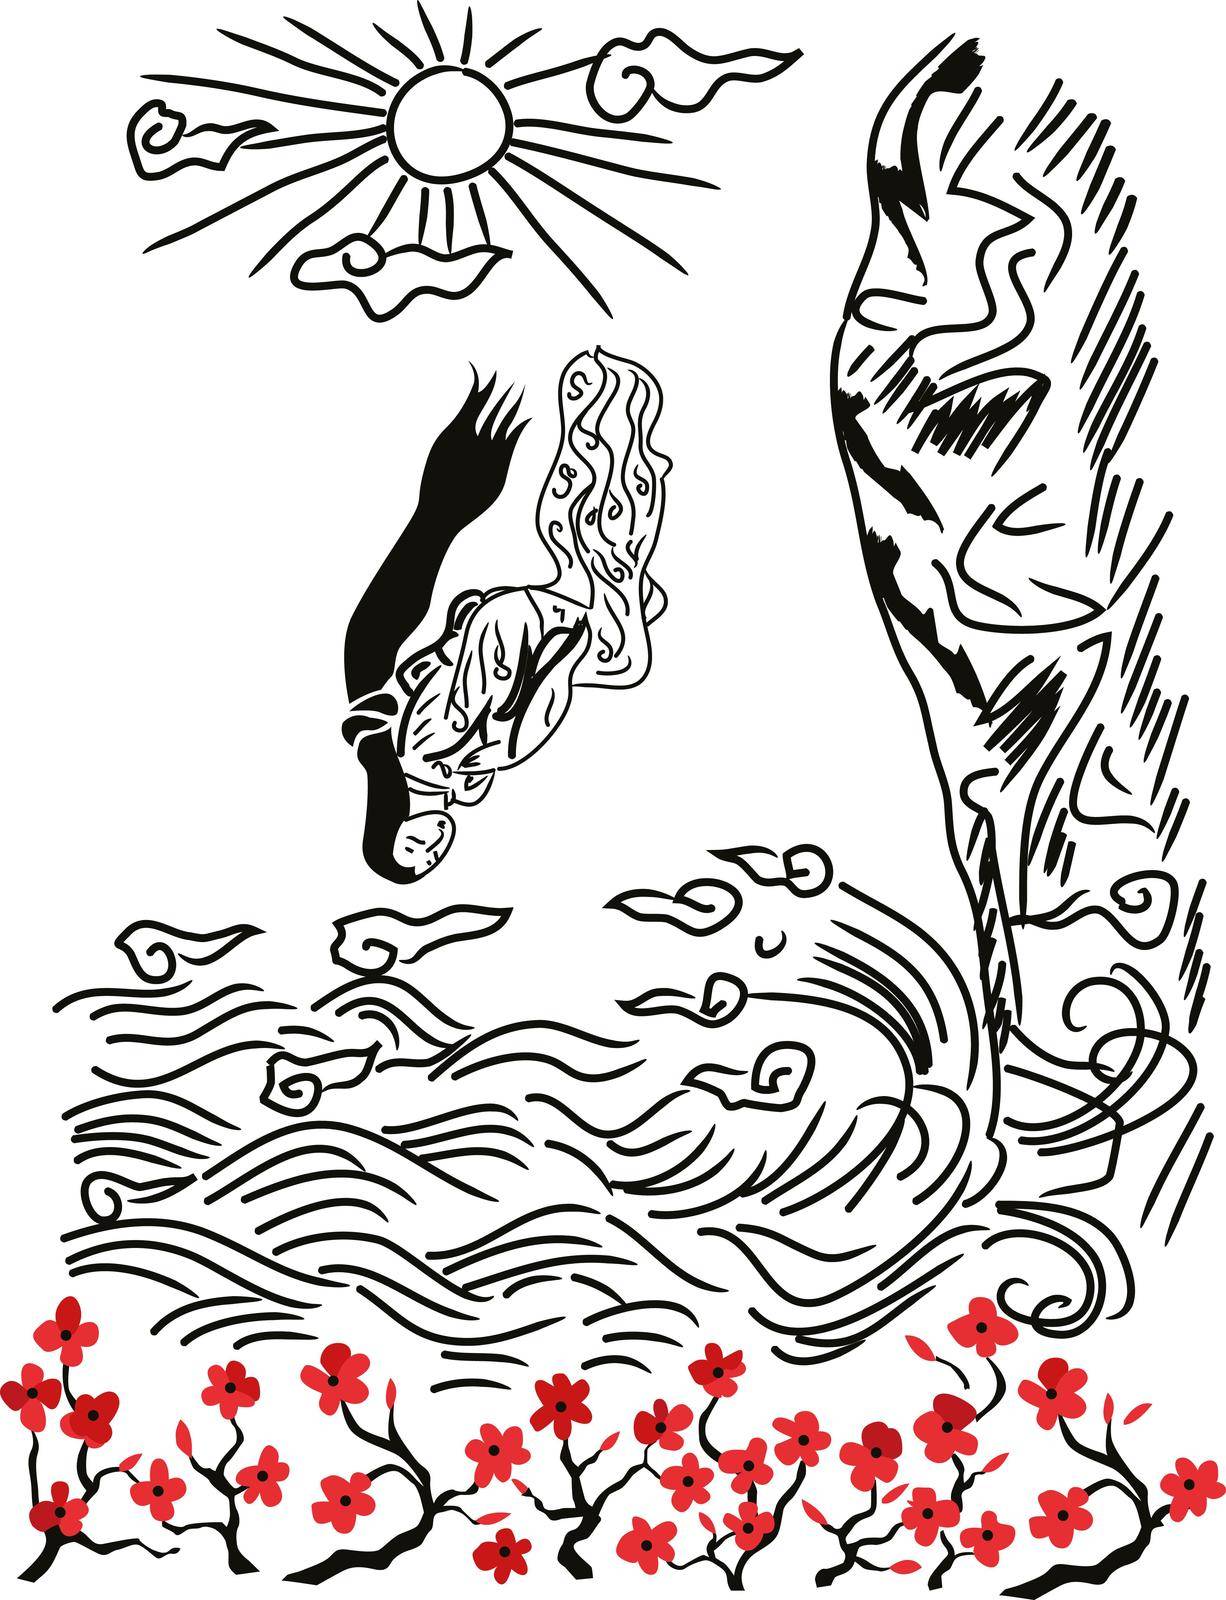 The Suicide Of A Japanese Lady While She Is Falling From A Rocky Shore Into Waves  - Vector Imitation Of Ink Drawing